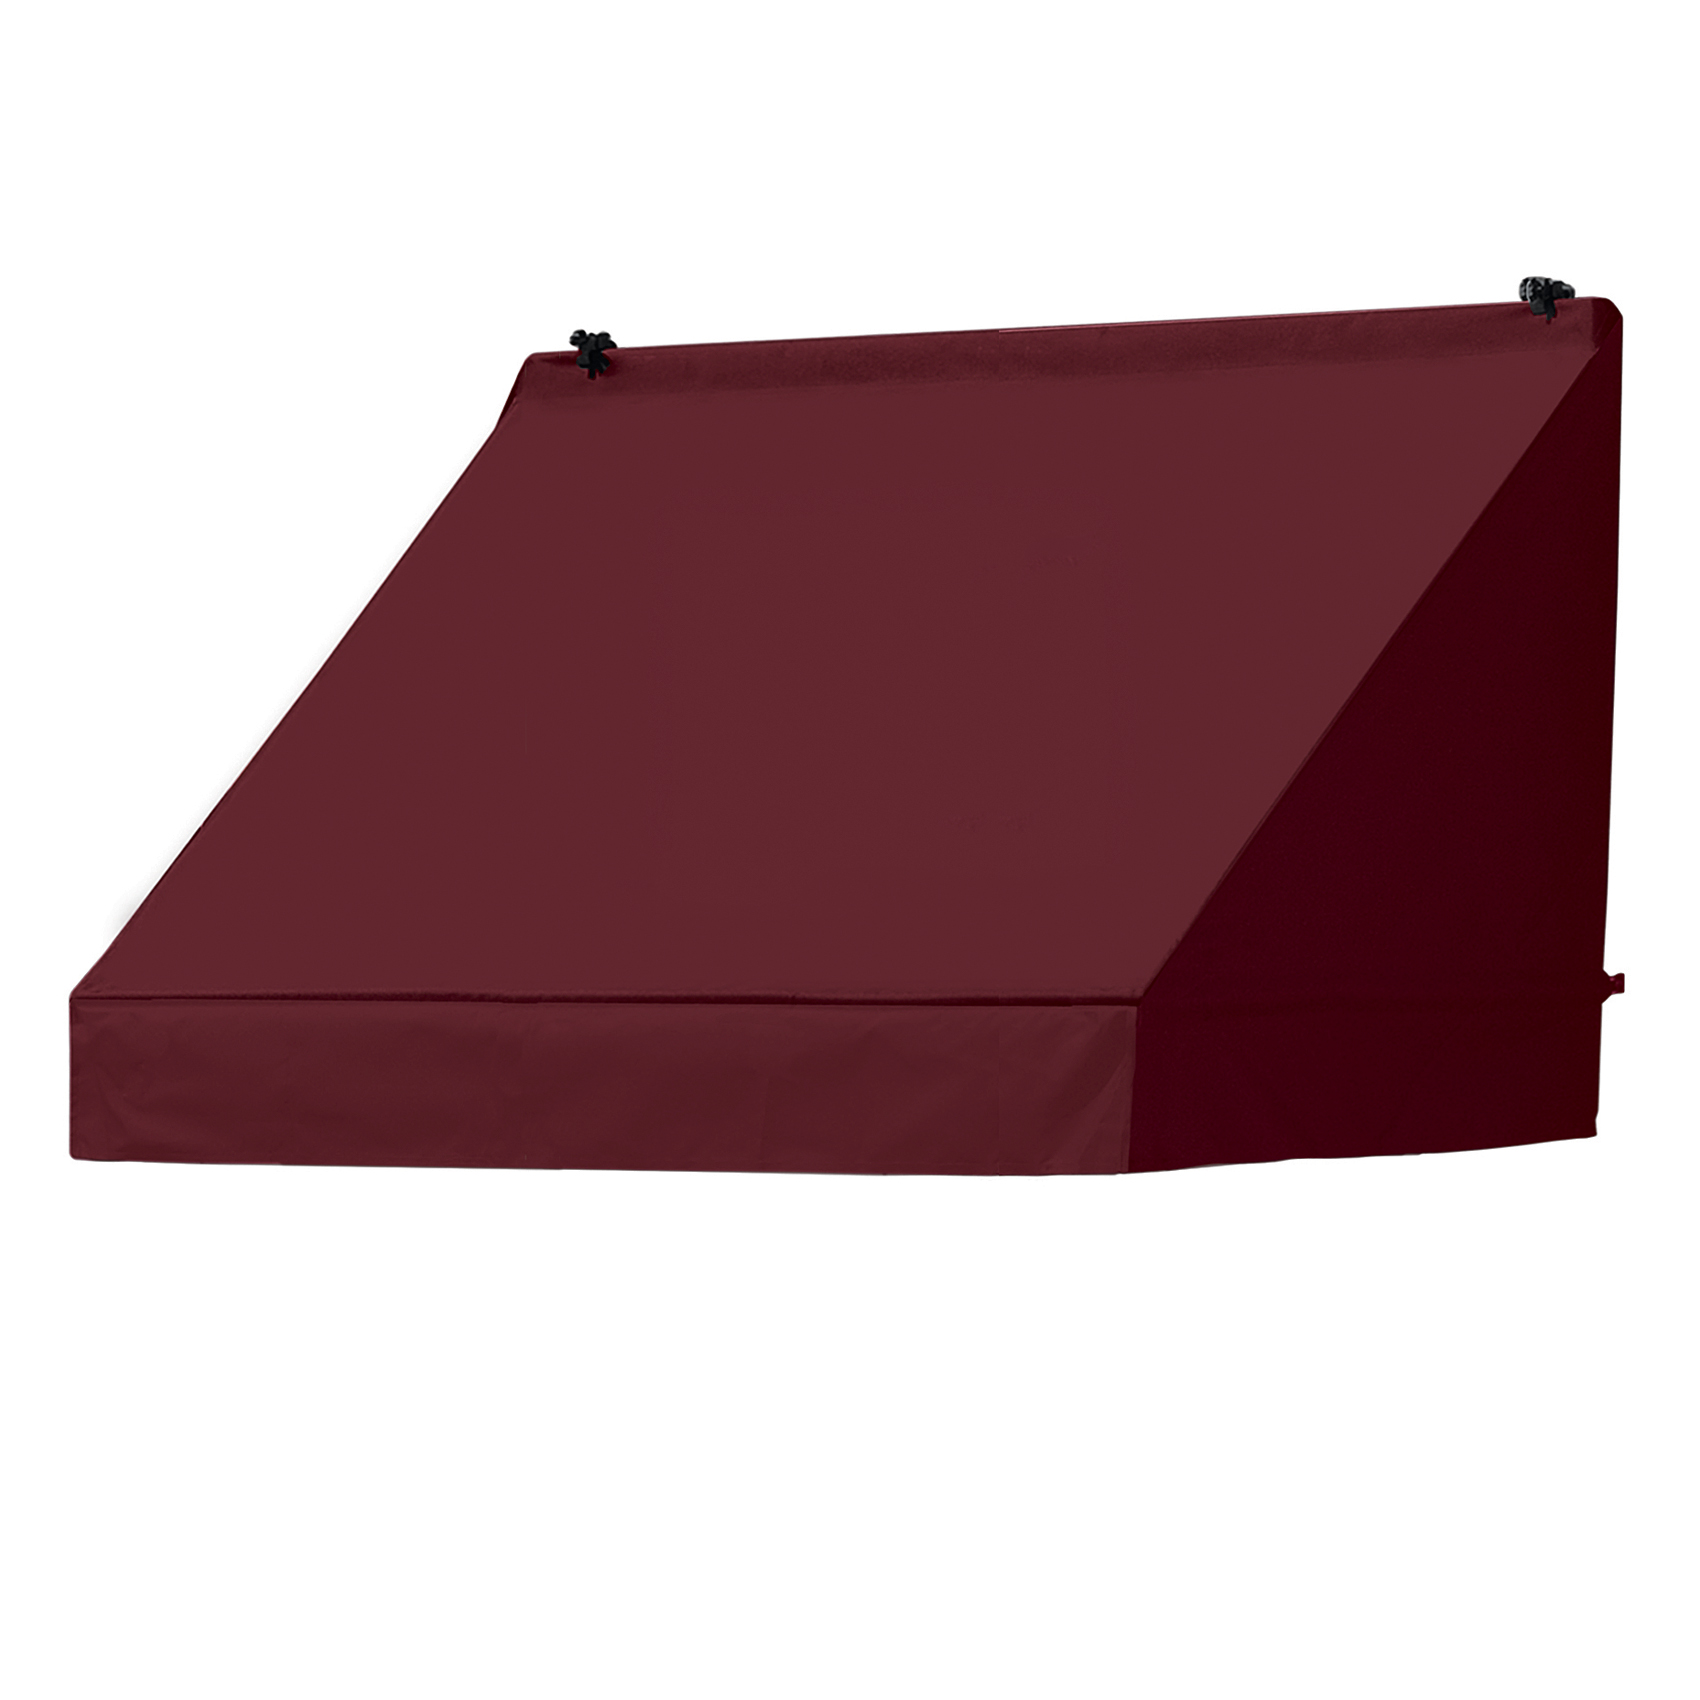 Coolaroo Awnings in a Box\u00ae 4\u002639; Traditional Style Awning Replacement Cover in Assorted 